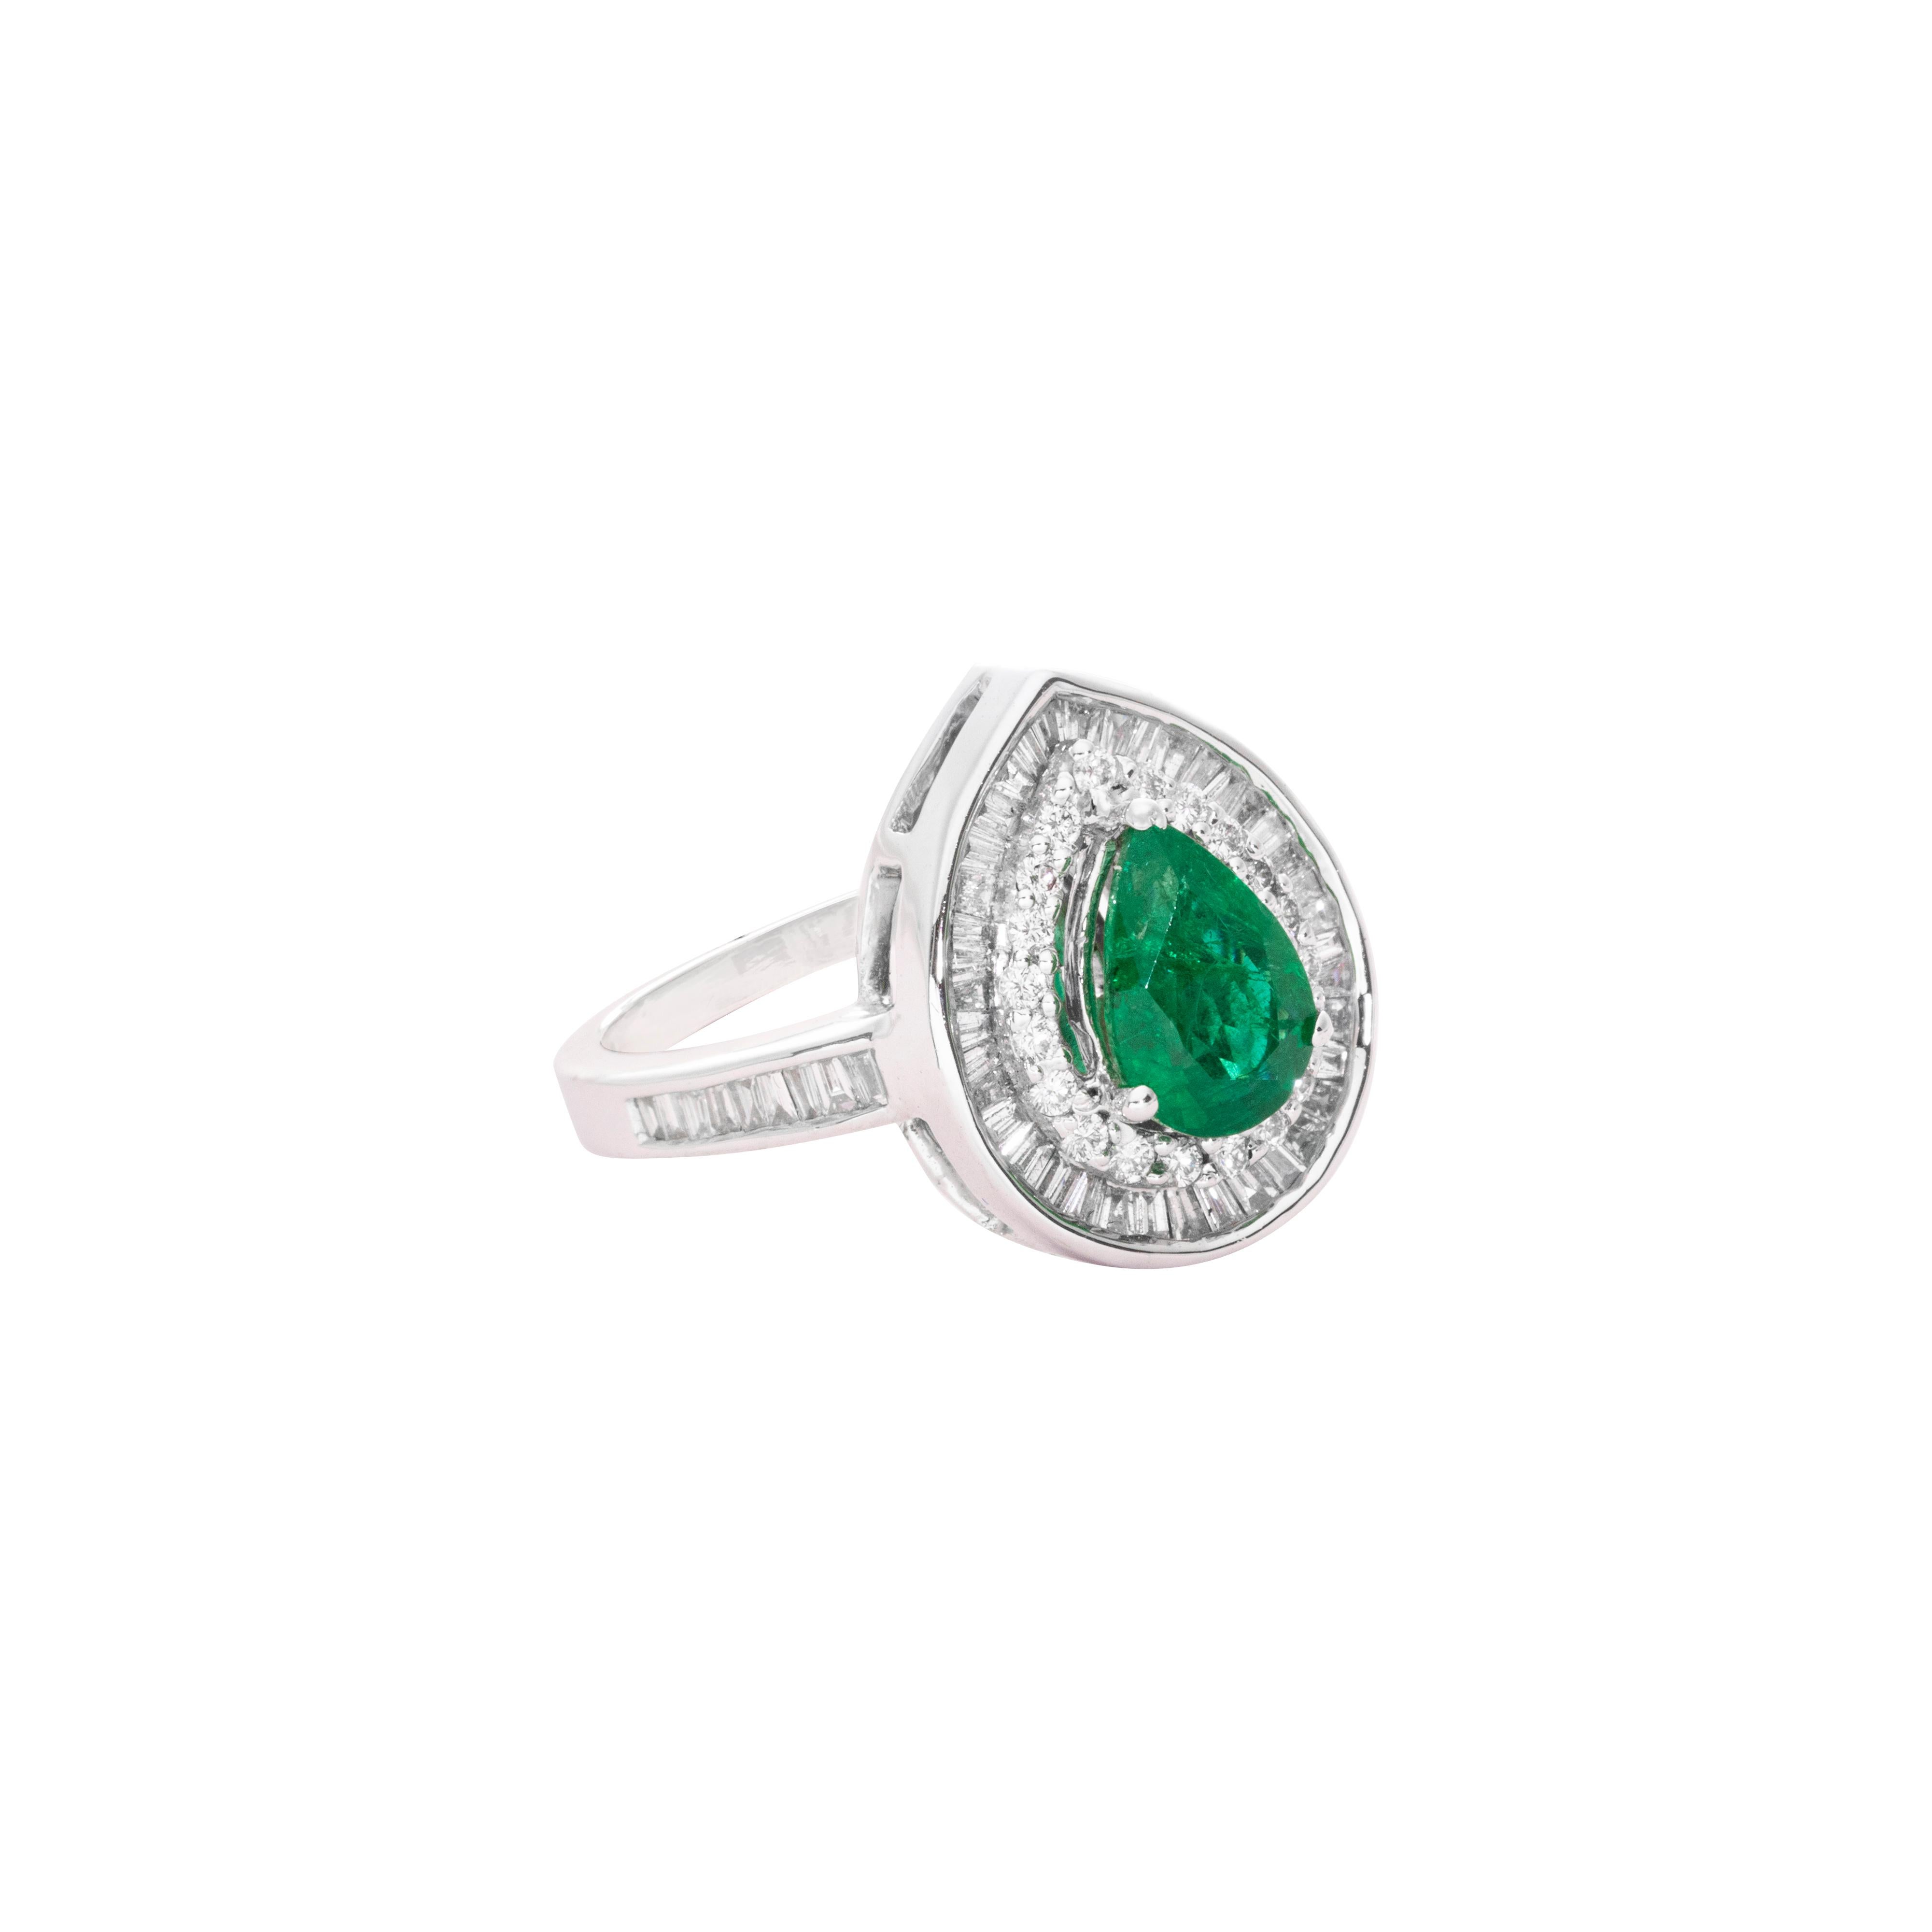 18 Karat White Gold Emerald Diamond Cocktail Ring

Classic cocktail ring set in 18 Karat white gold studded with a beautiful drop shape emerald, with a mix of round and baguette diamonds. This is ideal for both day and evening wear.

We will provide